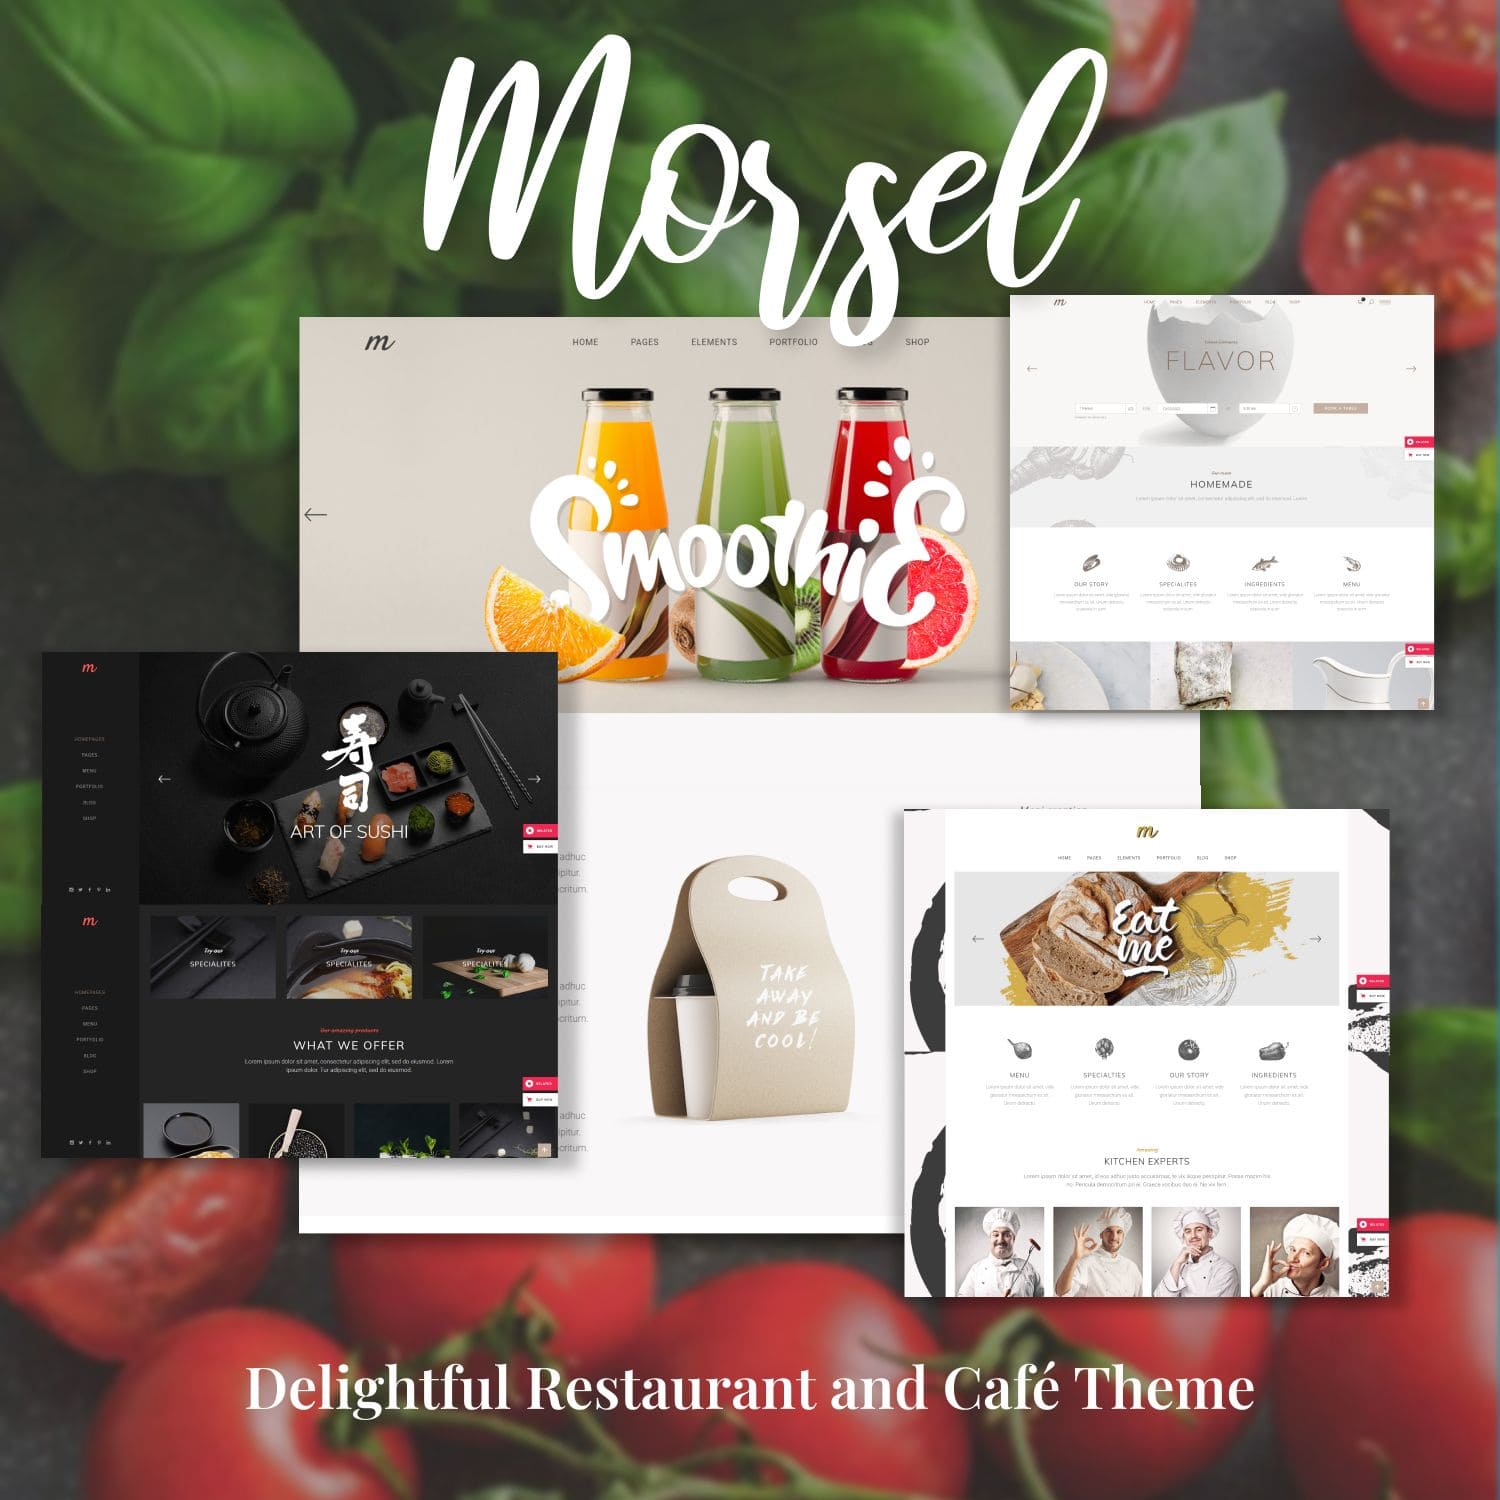 Morsel - Delightful Restaurant and Café Theme is perfect for any kind of restaurant, cafe or sushi bar.